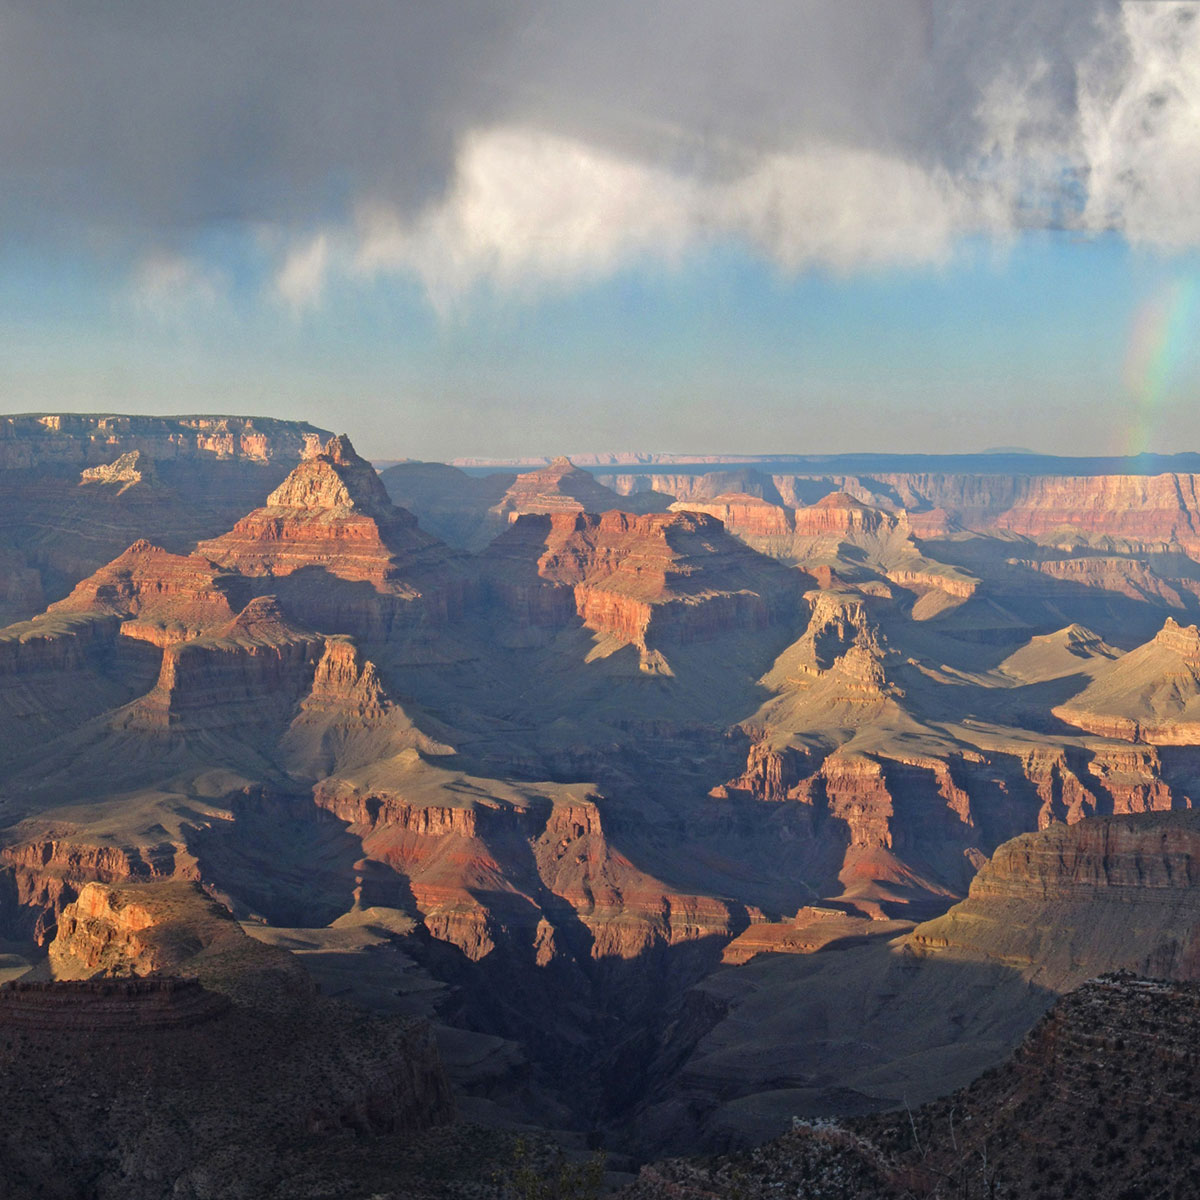 The setting sun casts shadows over the rocks with grey storm clouds above and a rainbow on the right.